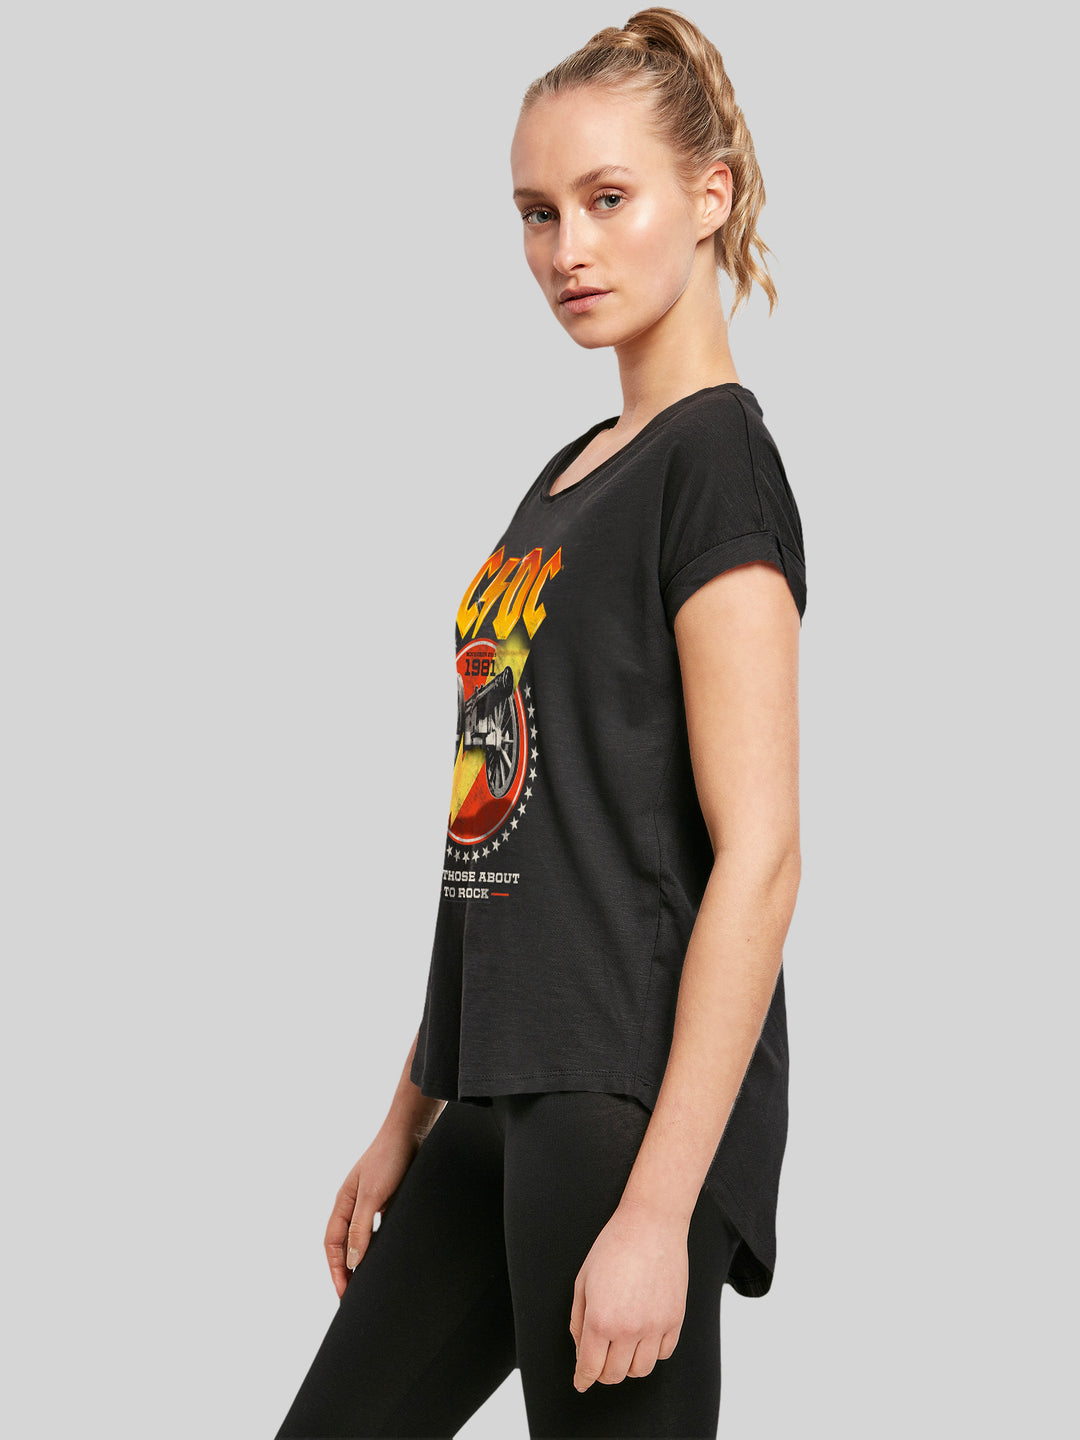 ACDC T-Shirt | For Those About To Rock 1981 | Premium Long Ladies Tee